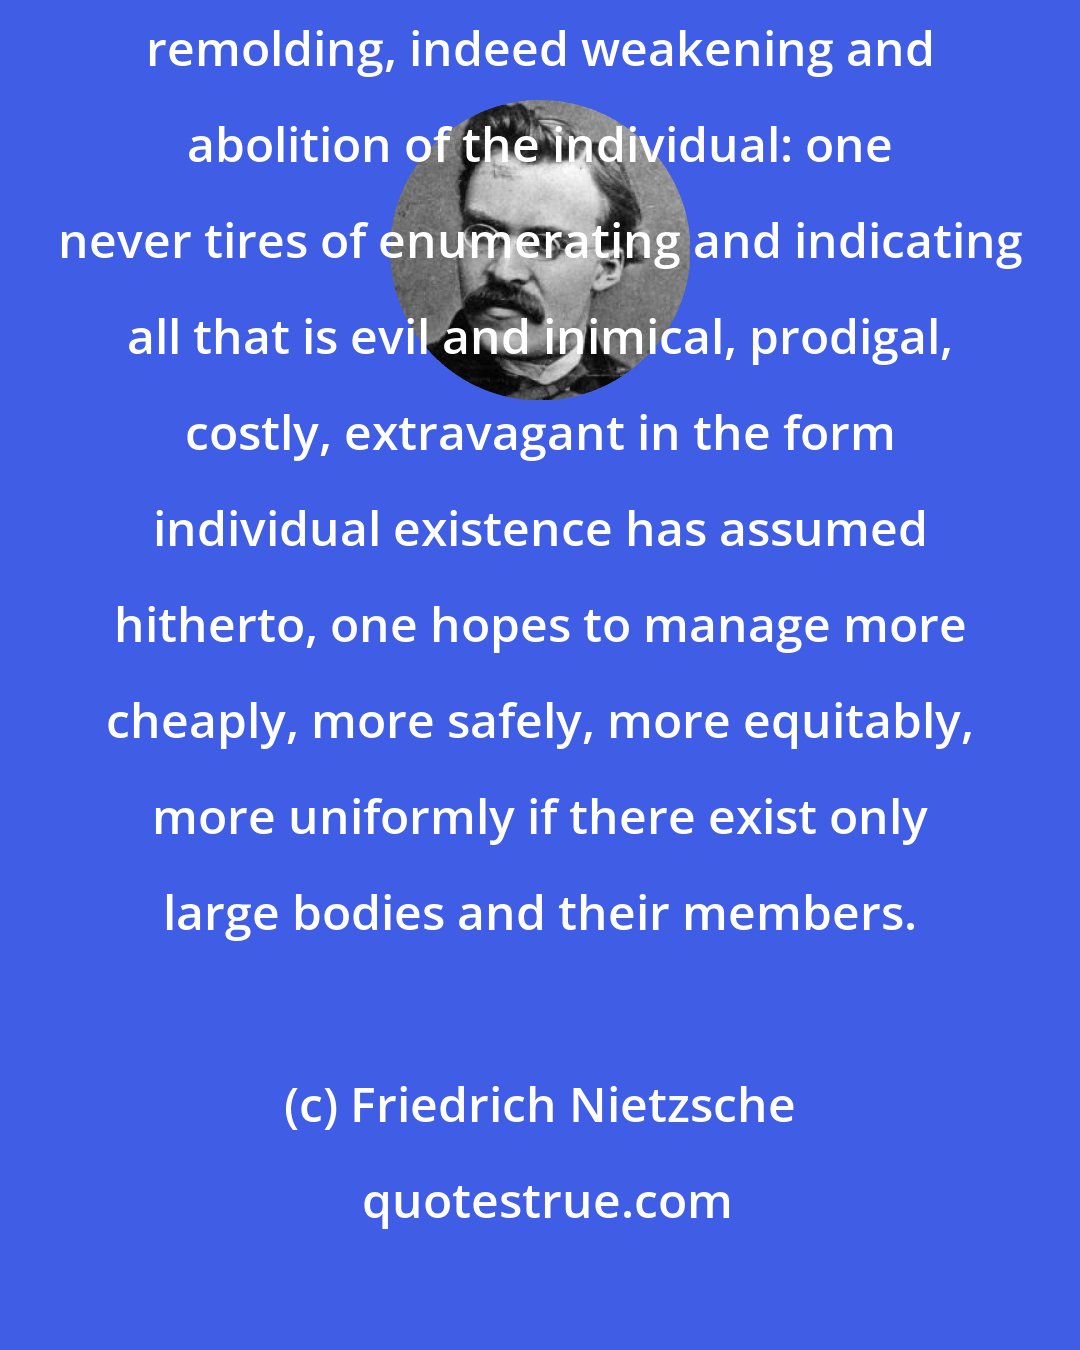 Friedrich Nietzsche: What is wanted - whether this is admitted or not - is nothing less than a fundamental remolding, indeed weakening and abolition of the individual: one never tires of enumerating and indicating all that is evil and inimical, prodigal, costly, extravagant in the form individual existence has assumed hitherto, one hopes to manage more cheaply, more safely, more equitably, more uniformly if there exist only large bodies and their members.